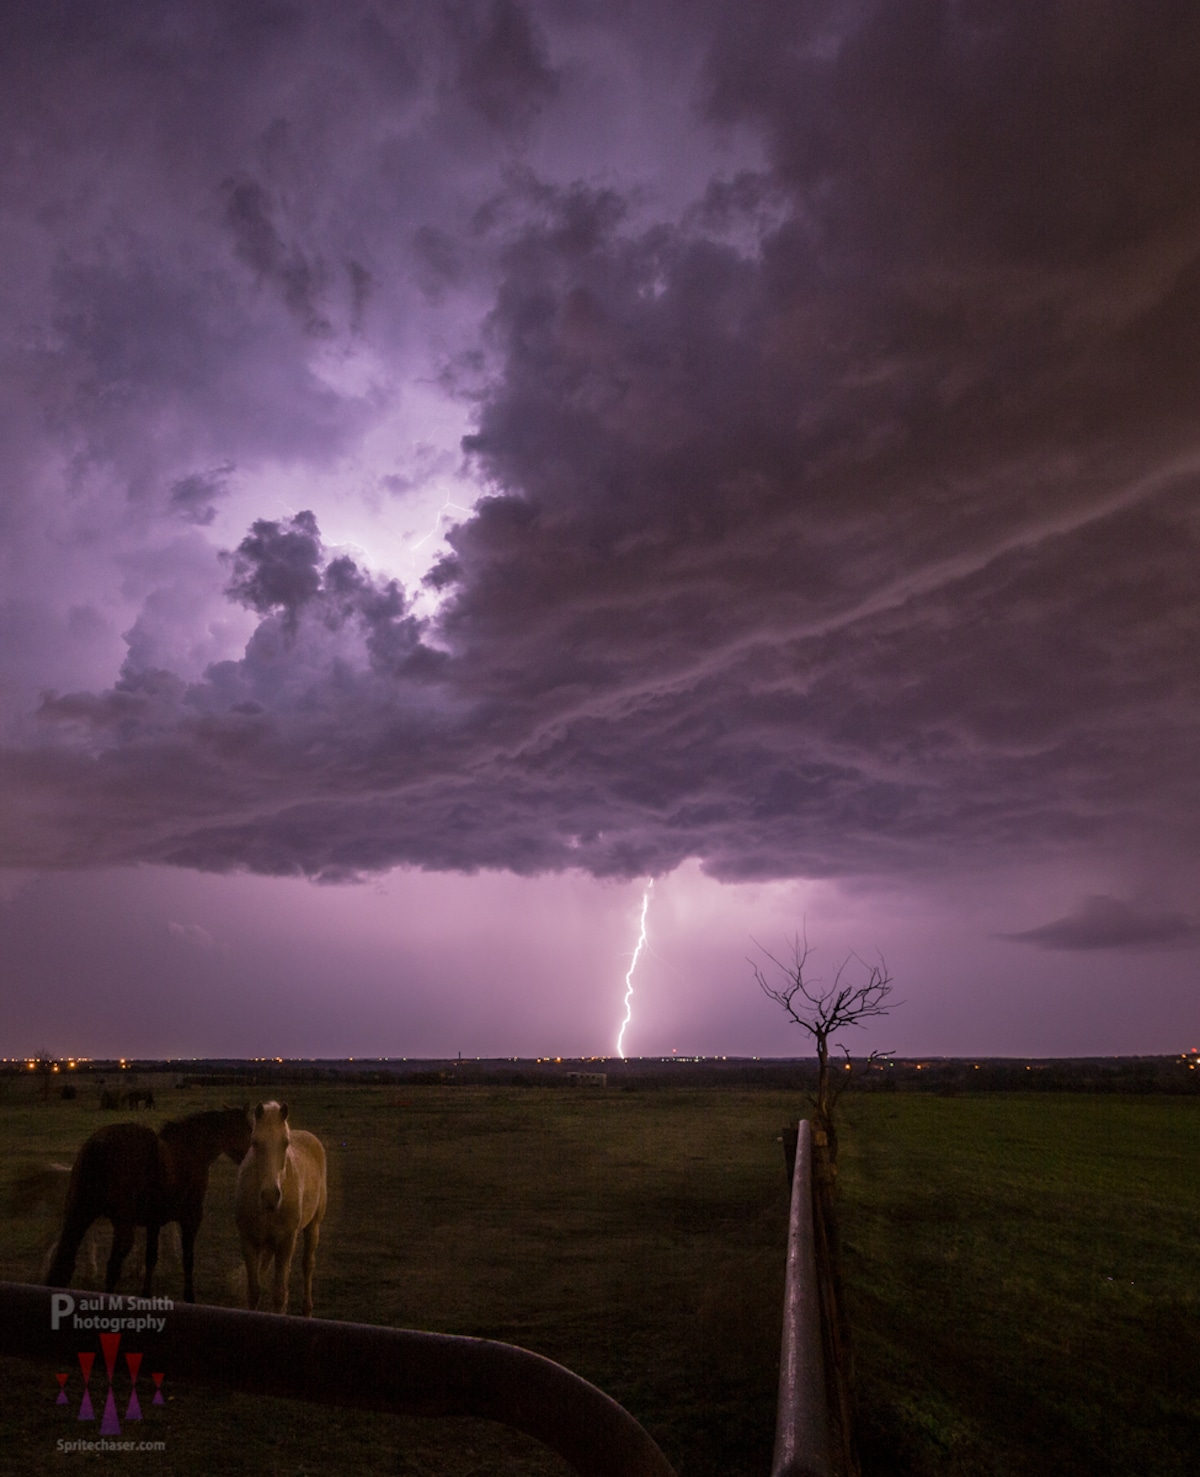 Paul M. Smith - Weather Photography